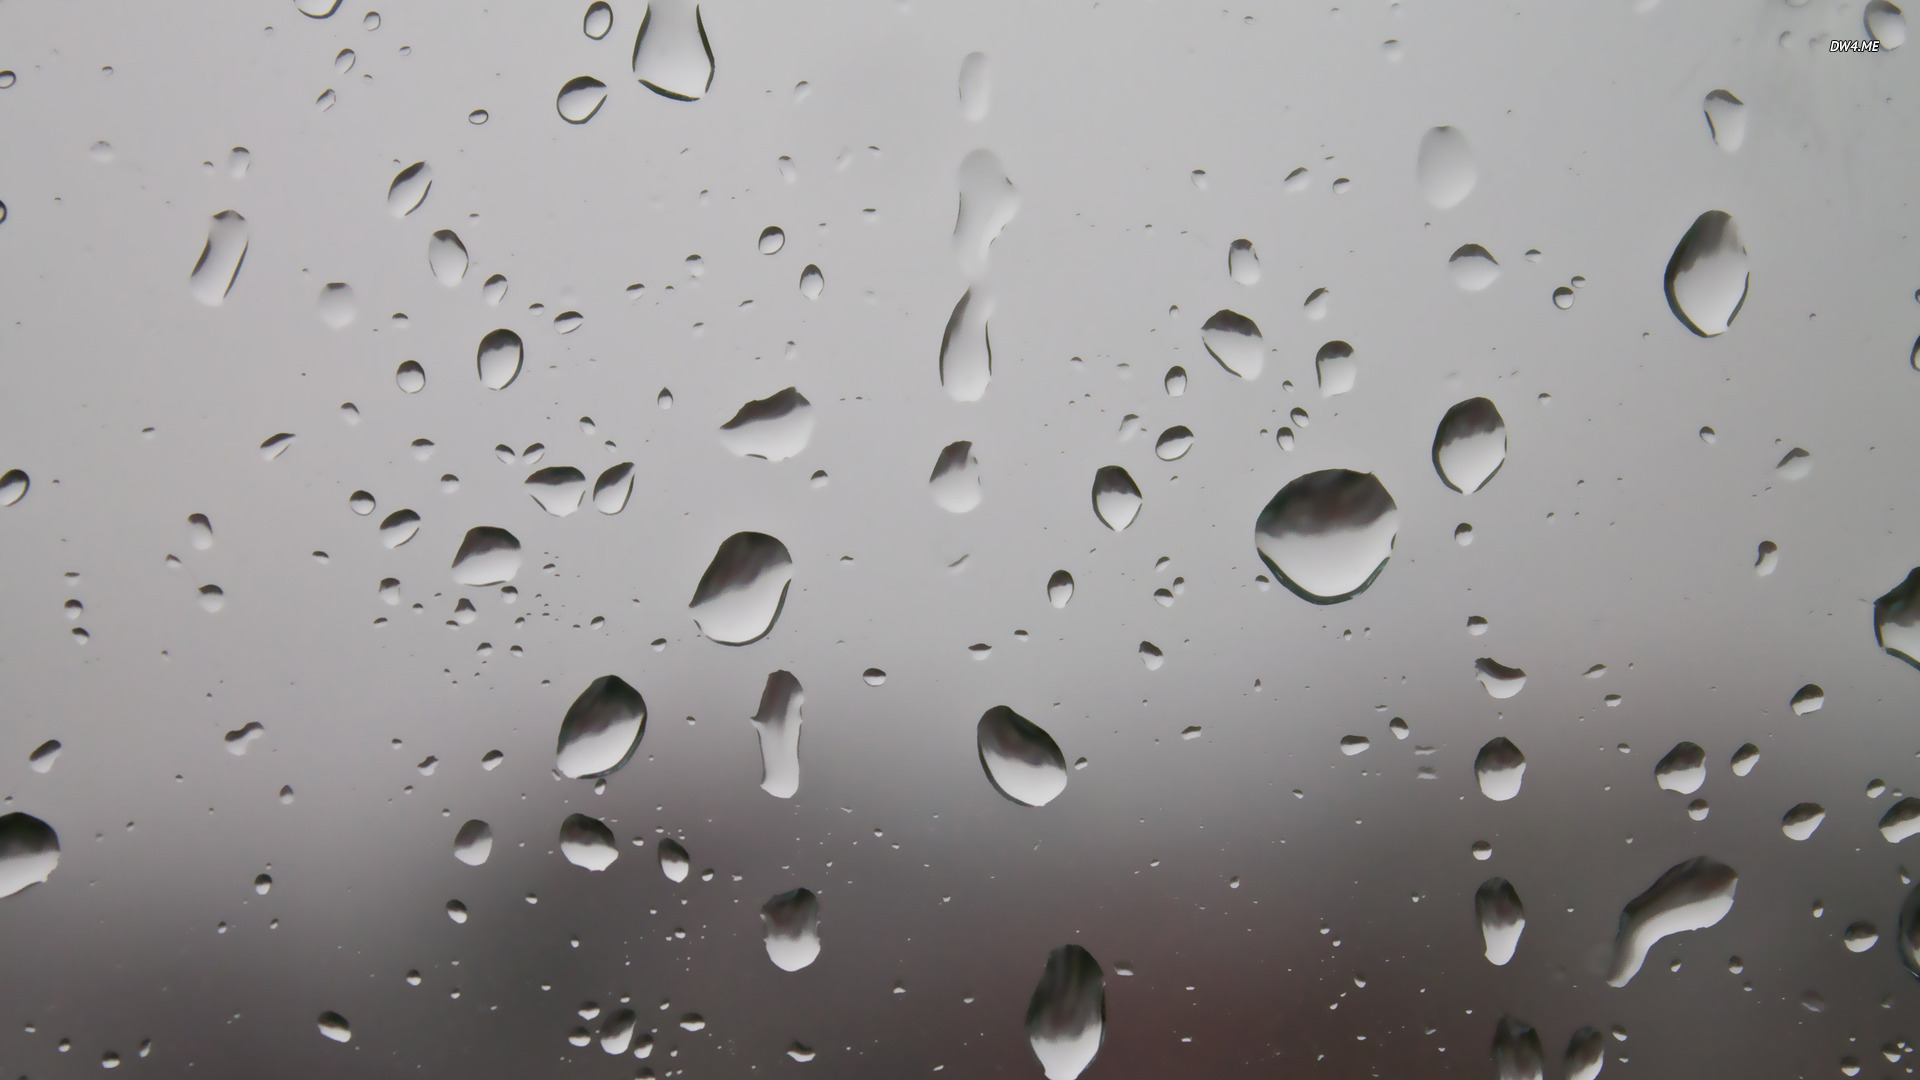 Raindrops on the window wallpaper   Photography wallpapers